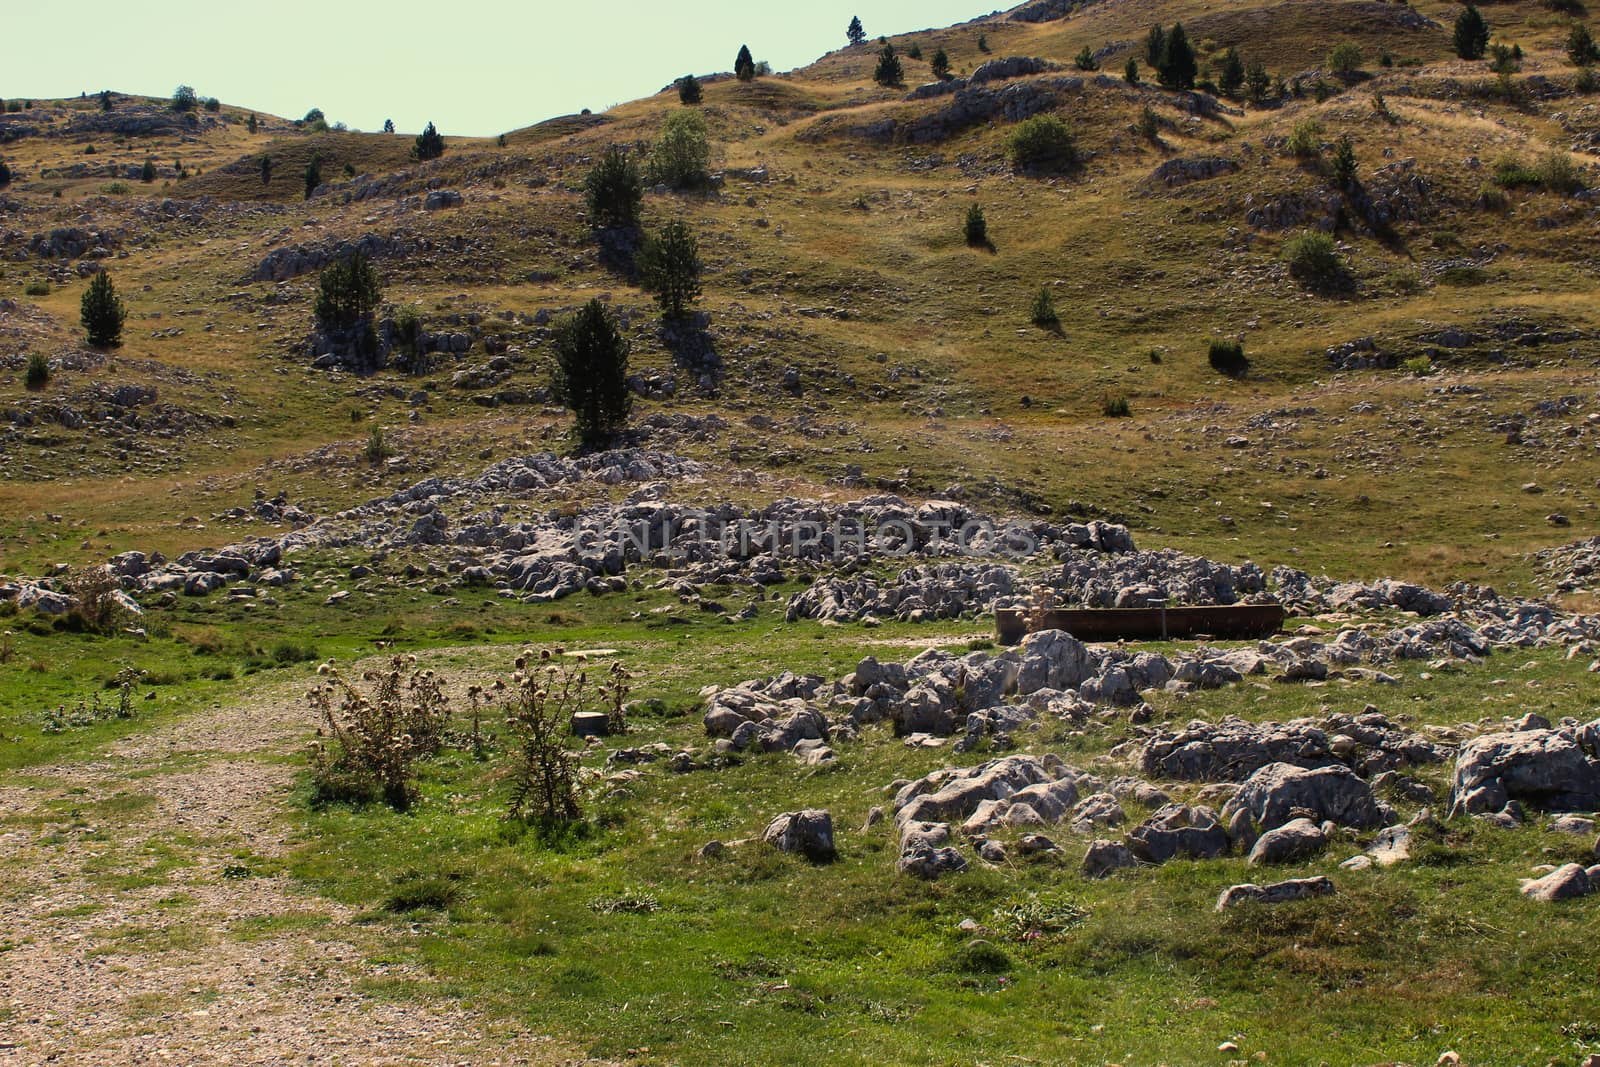 Access to the place where cattle (cows, sheep, goats, wild animals, etc.) drink water. Rocky part of Bjelasnica mountain, Bosnia and Herzegovina. by mahirrov